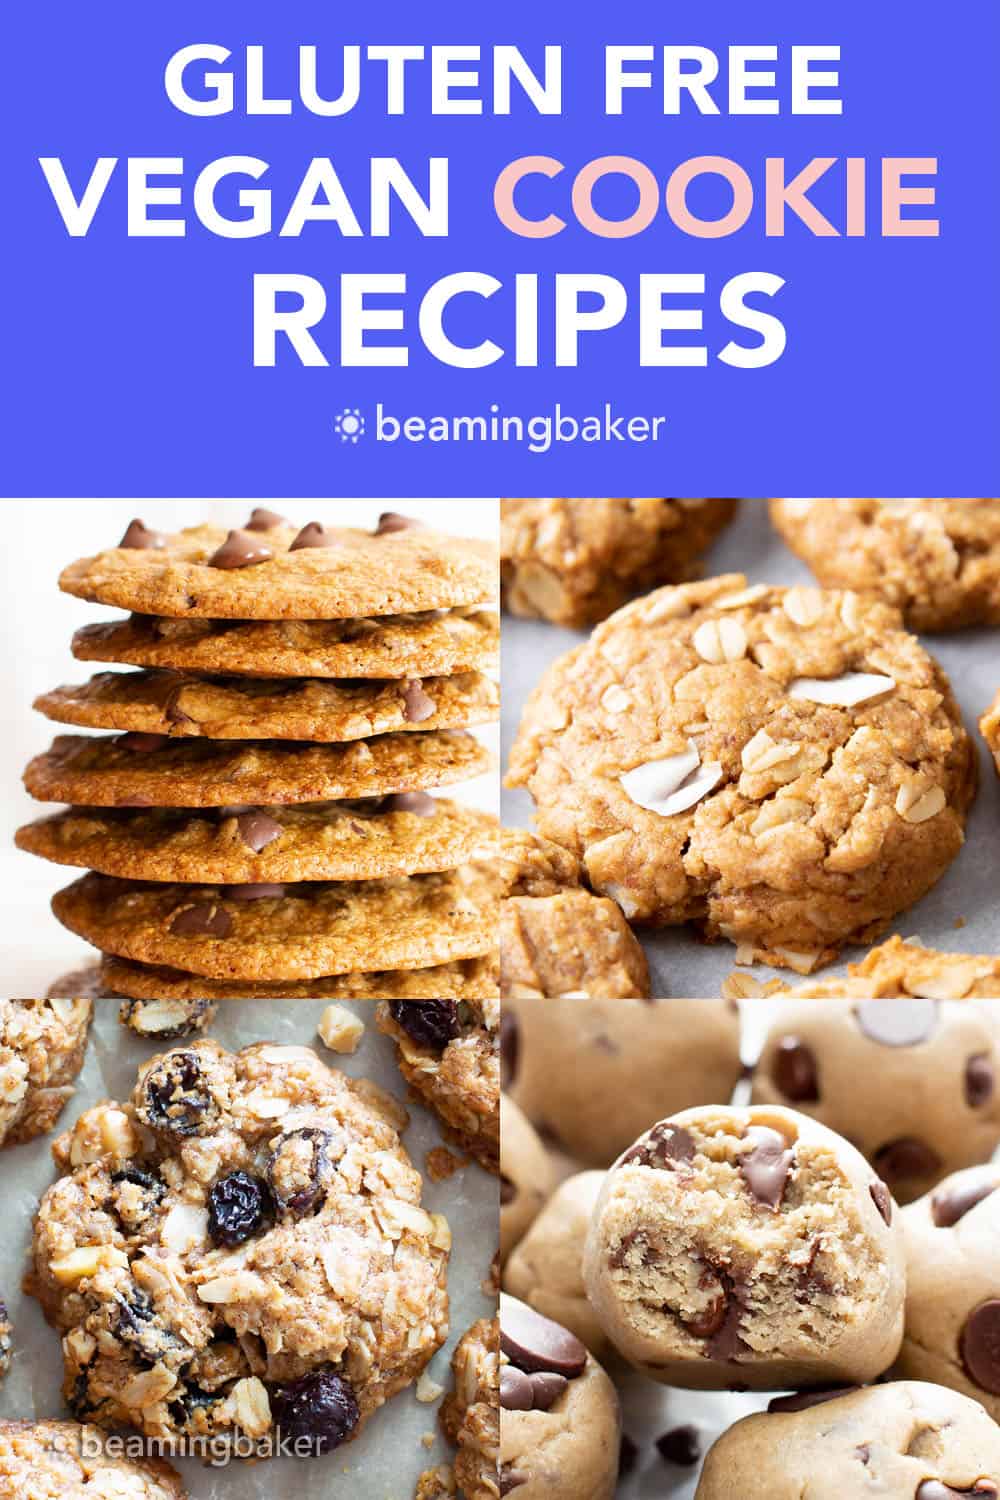 The BEST Vegan Gluten Free Cookies, all in one place! Find vegan gluten free oatmeal cookies, vegan gluten free chocolate chip cookies, V+GF peanut butter cookies, cookie dough, oatmeal raisin and more! #VeganGlutenFree #VeganCookies #GlutenFreeVegan #GlutenFreeCookies | Recipes at BeamingBaker.com